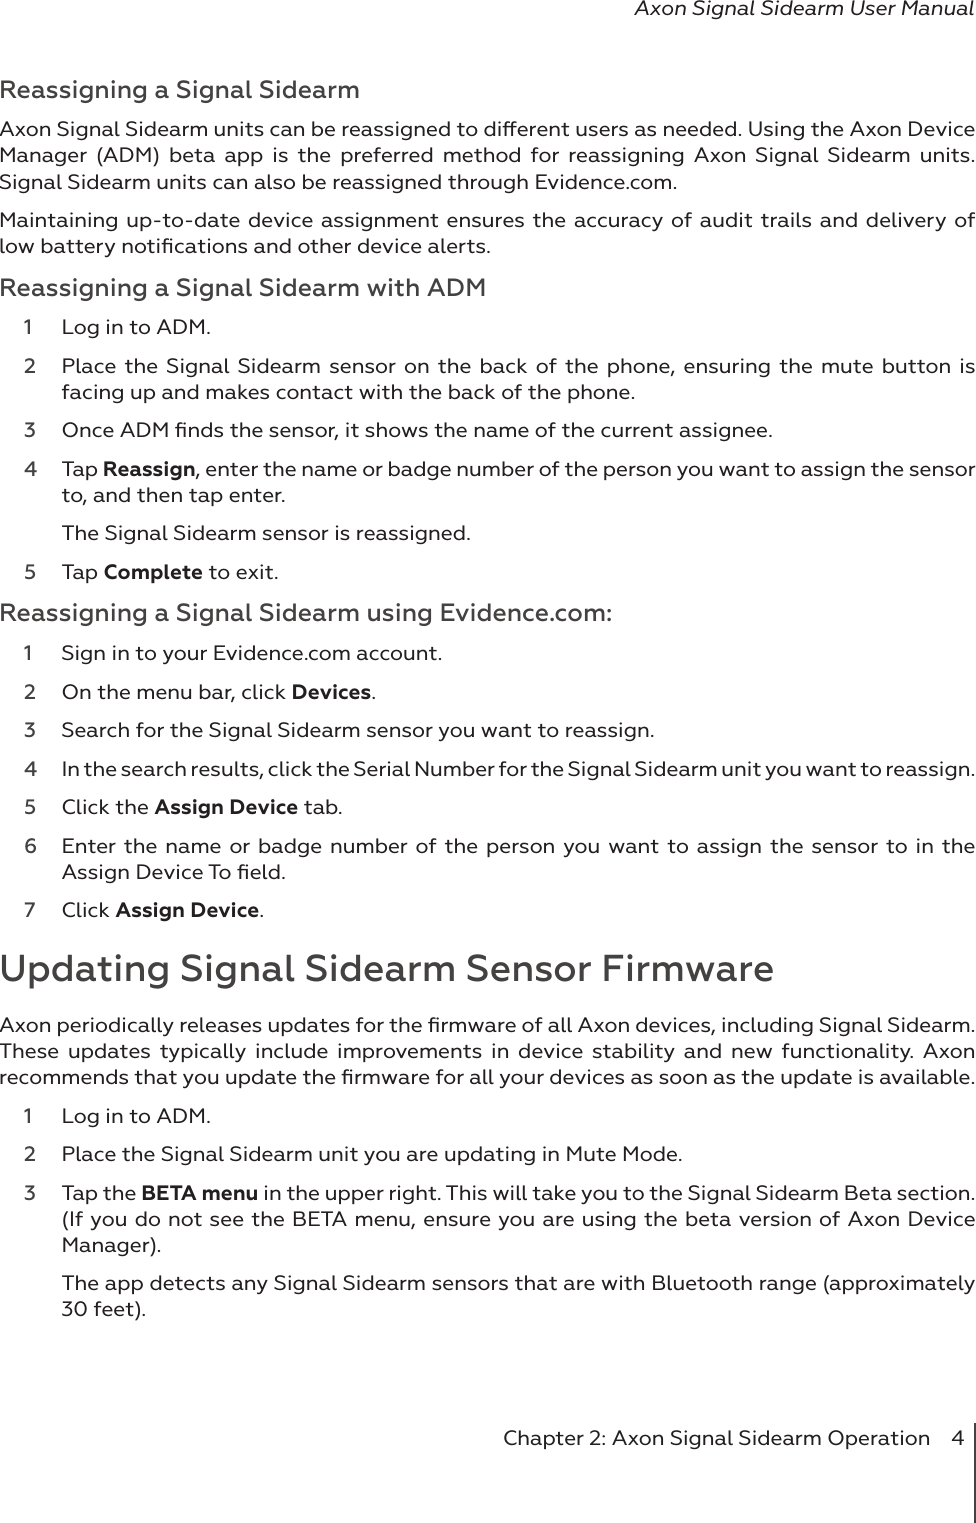 Chapter 2: Axon Signal Sidearm Operation  4Axon Signal Sidearm User ManualReassigning a Signal SidearmAxon Signal Sidearm units can be reassigned to dierent users as needed. Using the Axon Device Manager (ADM) beta app is the preferred method for reassigning Axon Signal Sidearm units. Signal Sidearm units can also be reassigned through Evidence.com. Maintaining up-to-date device assignment ensures the accuracy of audit trails and delivery of low battery notiﬁcations and other device alerts. Reassigning a Signal Sidearm with ADM1  Log in to ADM.2  Place the Signal Sidearm sensor on the back of the phone, ensuring the mute button is facing up and makes contact with the back of the phone.3  Once ADM ﬁnds the sensor, it shows the name of the current assignee.   4  Tap Reassign, enter the name or badge number of the person you want to assign the sensor to, and then tap enter.  The Signal Sidearm sensor is reassigned. 5  Tap Complete to exit. Reassigning a Signal Sidearm using Evidence.com:1  Sign in to your Evidence.com account.2  On the menu bar, click Devices. 3  Search for the Signal Sidearm sensor you want to reassign. 4  In the search results, click the Serial Number for the Signal Sidearm unit you want to reassign. 5  Click the Assign Device tab. 6  Enter the name or badge number of the person you want to assign the sensor to in the Assign Device To ﬁeld. 7  Click Assign Device. Updating Signal Sidearm Sensor FirmwareAxon periodically releases updates for the ﬁrmware of all Axon devices, including Signal Sidearm. These updates typically include improvements in device stability and new functionality. Axon recommends that you update the ﬁrmware for all your devices as soon as the update is available. 1  Log in to ADM. 2  Place the Signal Sidearm unit you are updating in Mute Mode. 3  Tap the BETA menu in the upper right. This will take you to the Signal Sidearm Beta section. (If you do not see the BETA menu, ensure you are using the beta version of Axon Device Manager). The app detects any Signal Sidearm sensors that are with Bluetooth range (approximately 30 feet). 